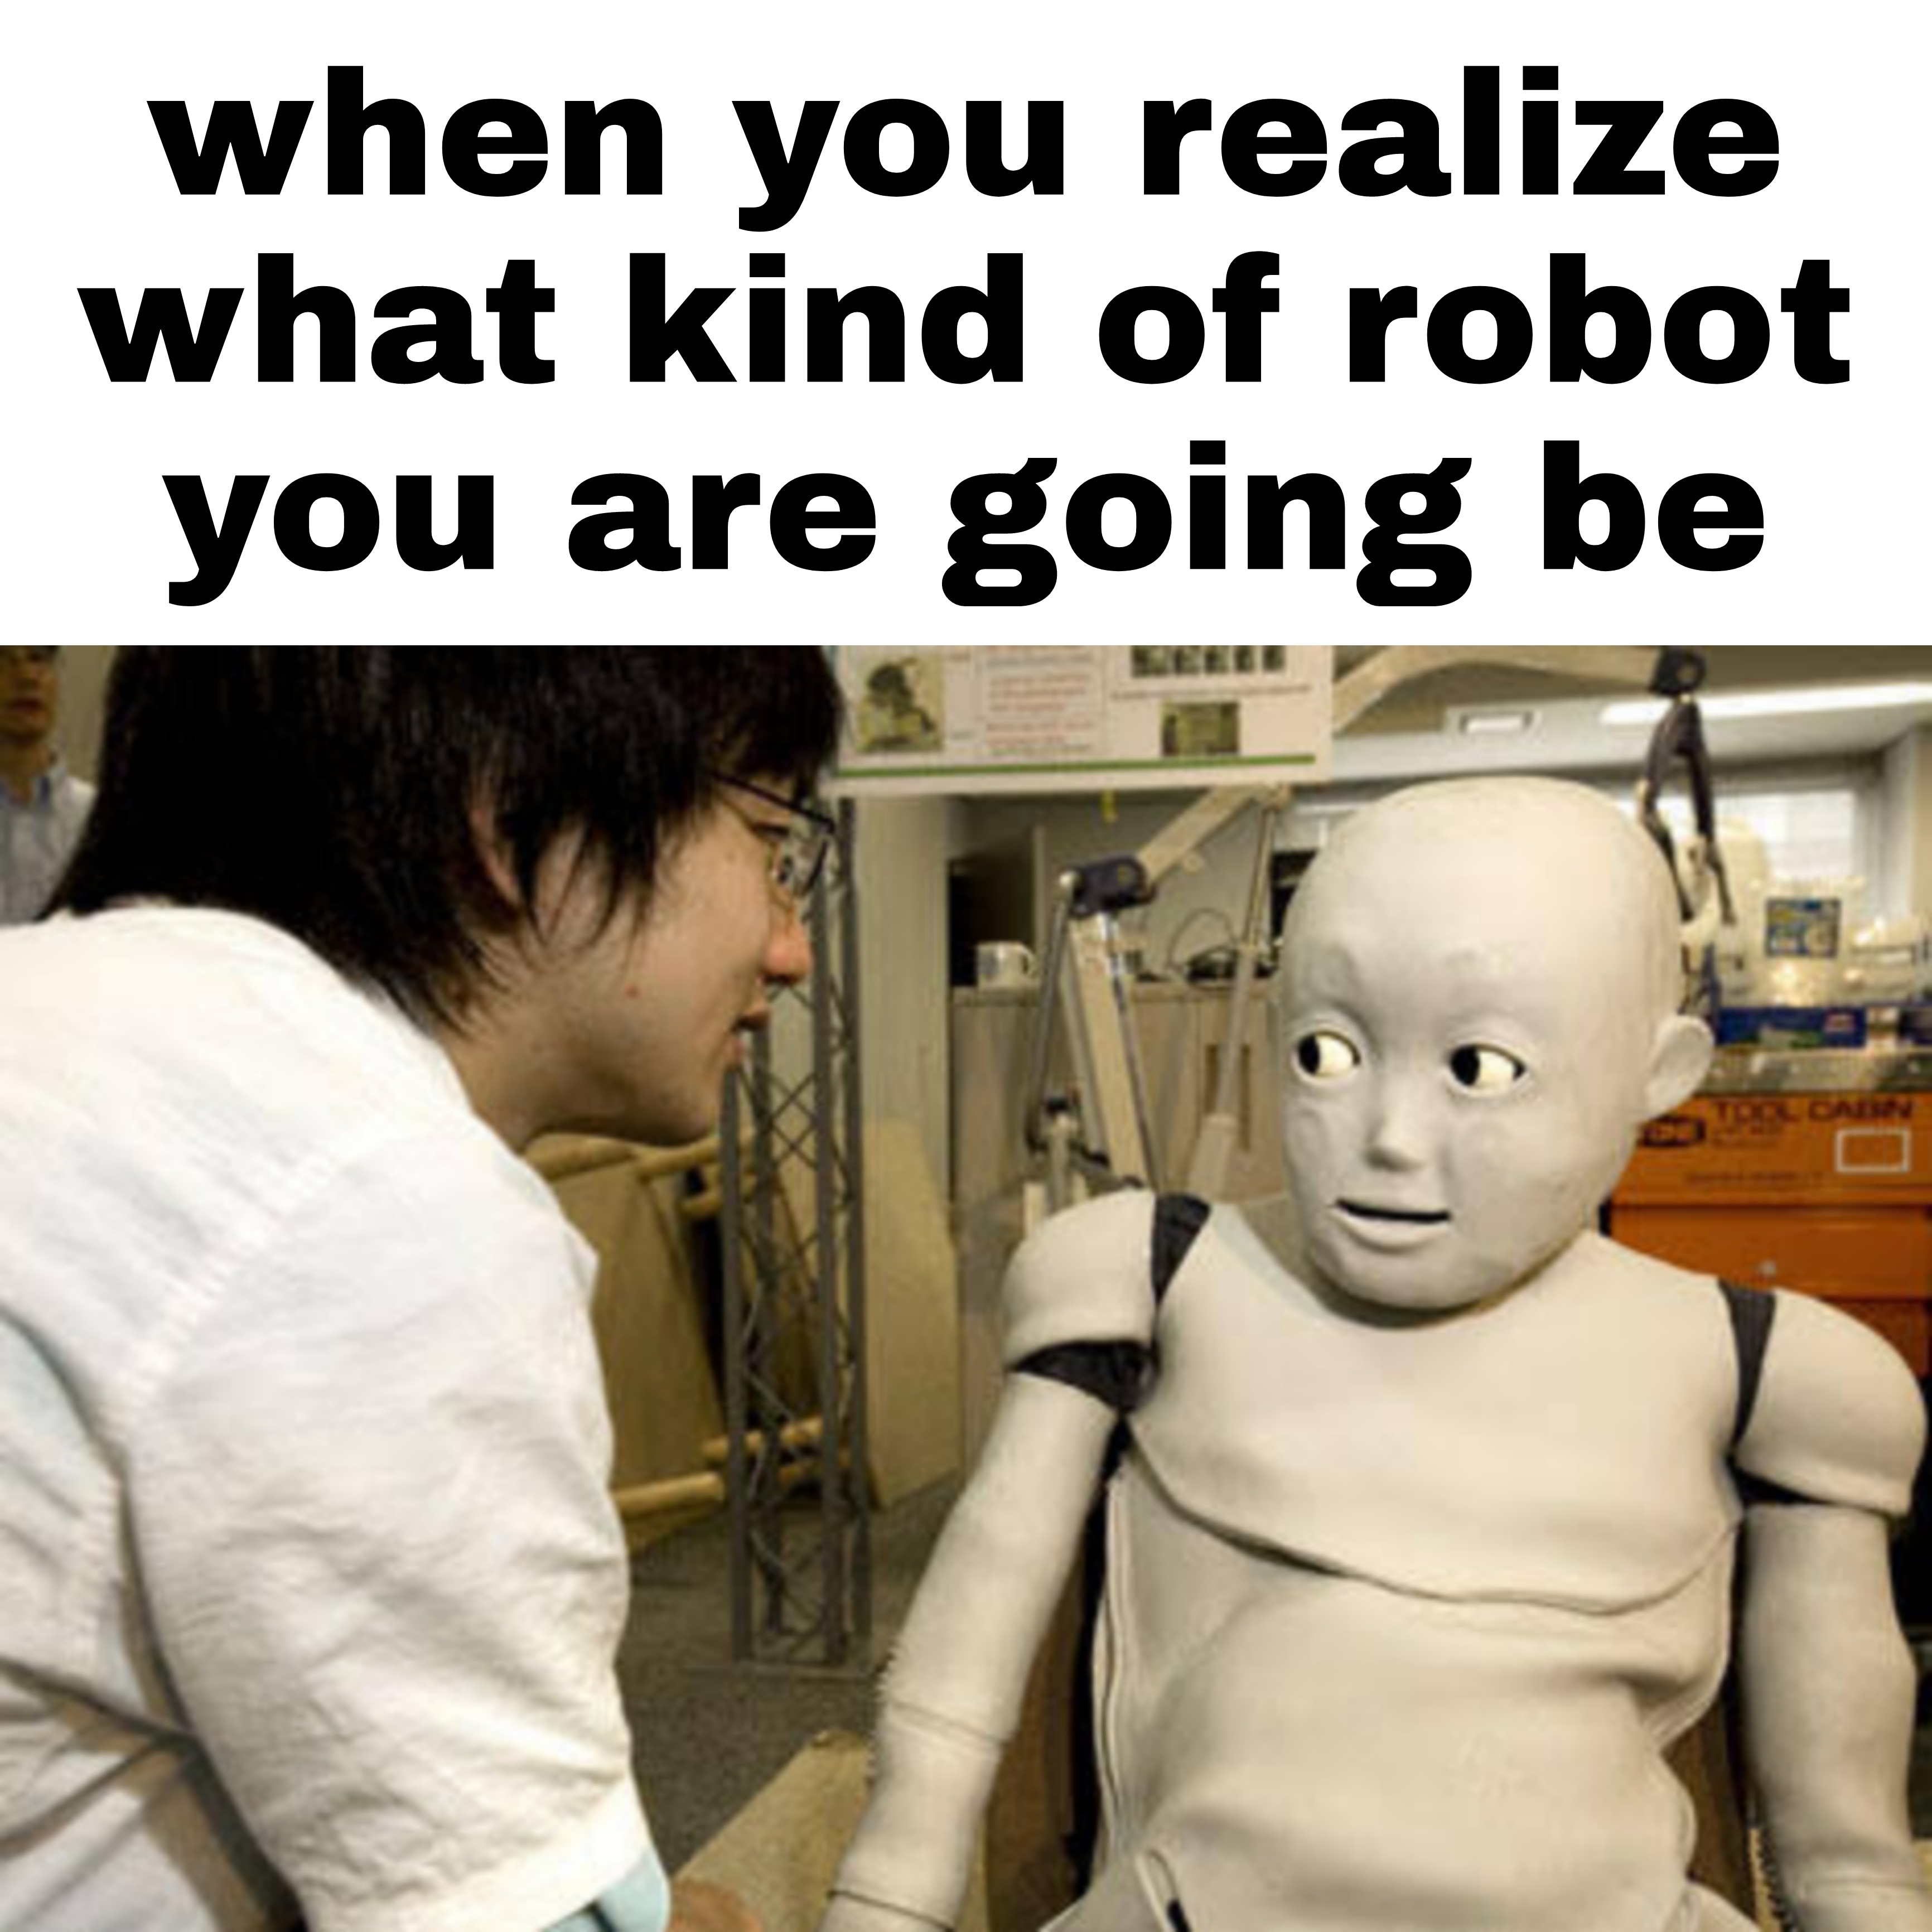 monday morning randomness - Meme - when you realize what kind of robot you are going be